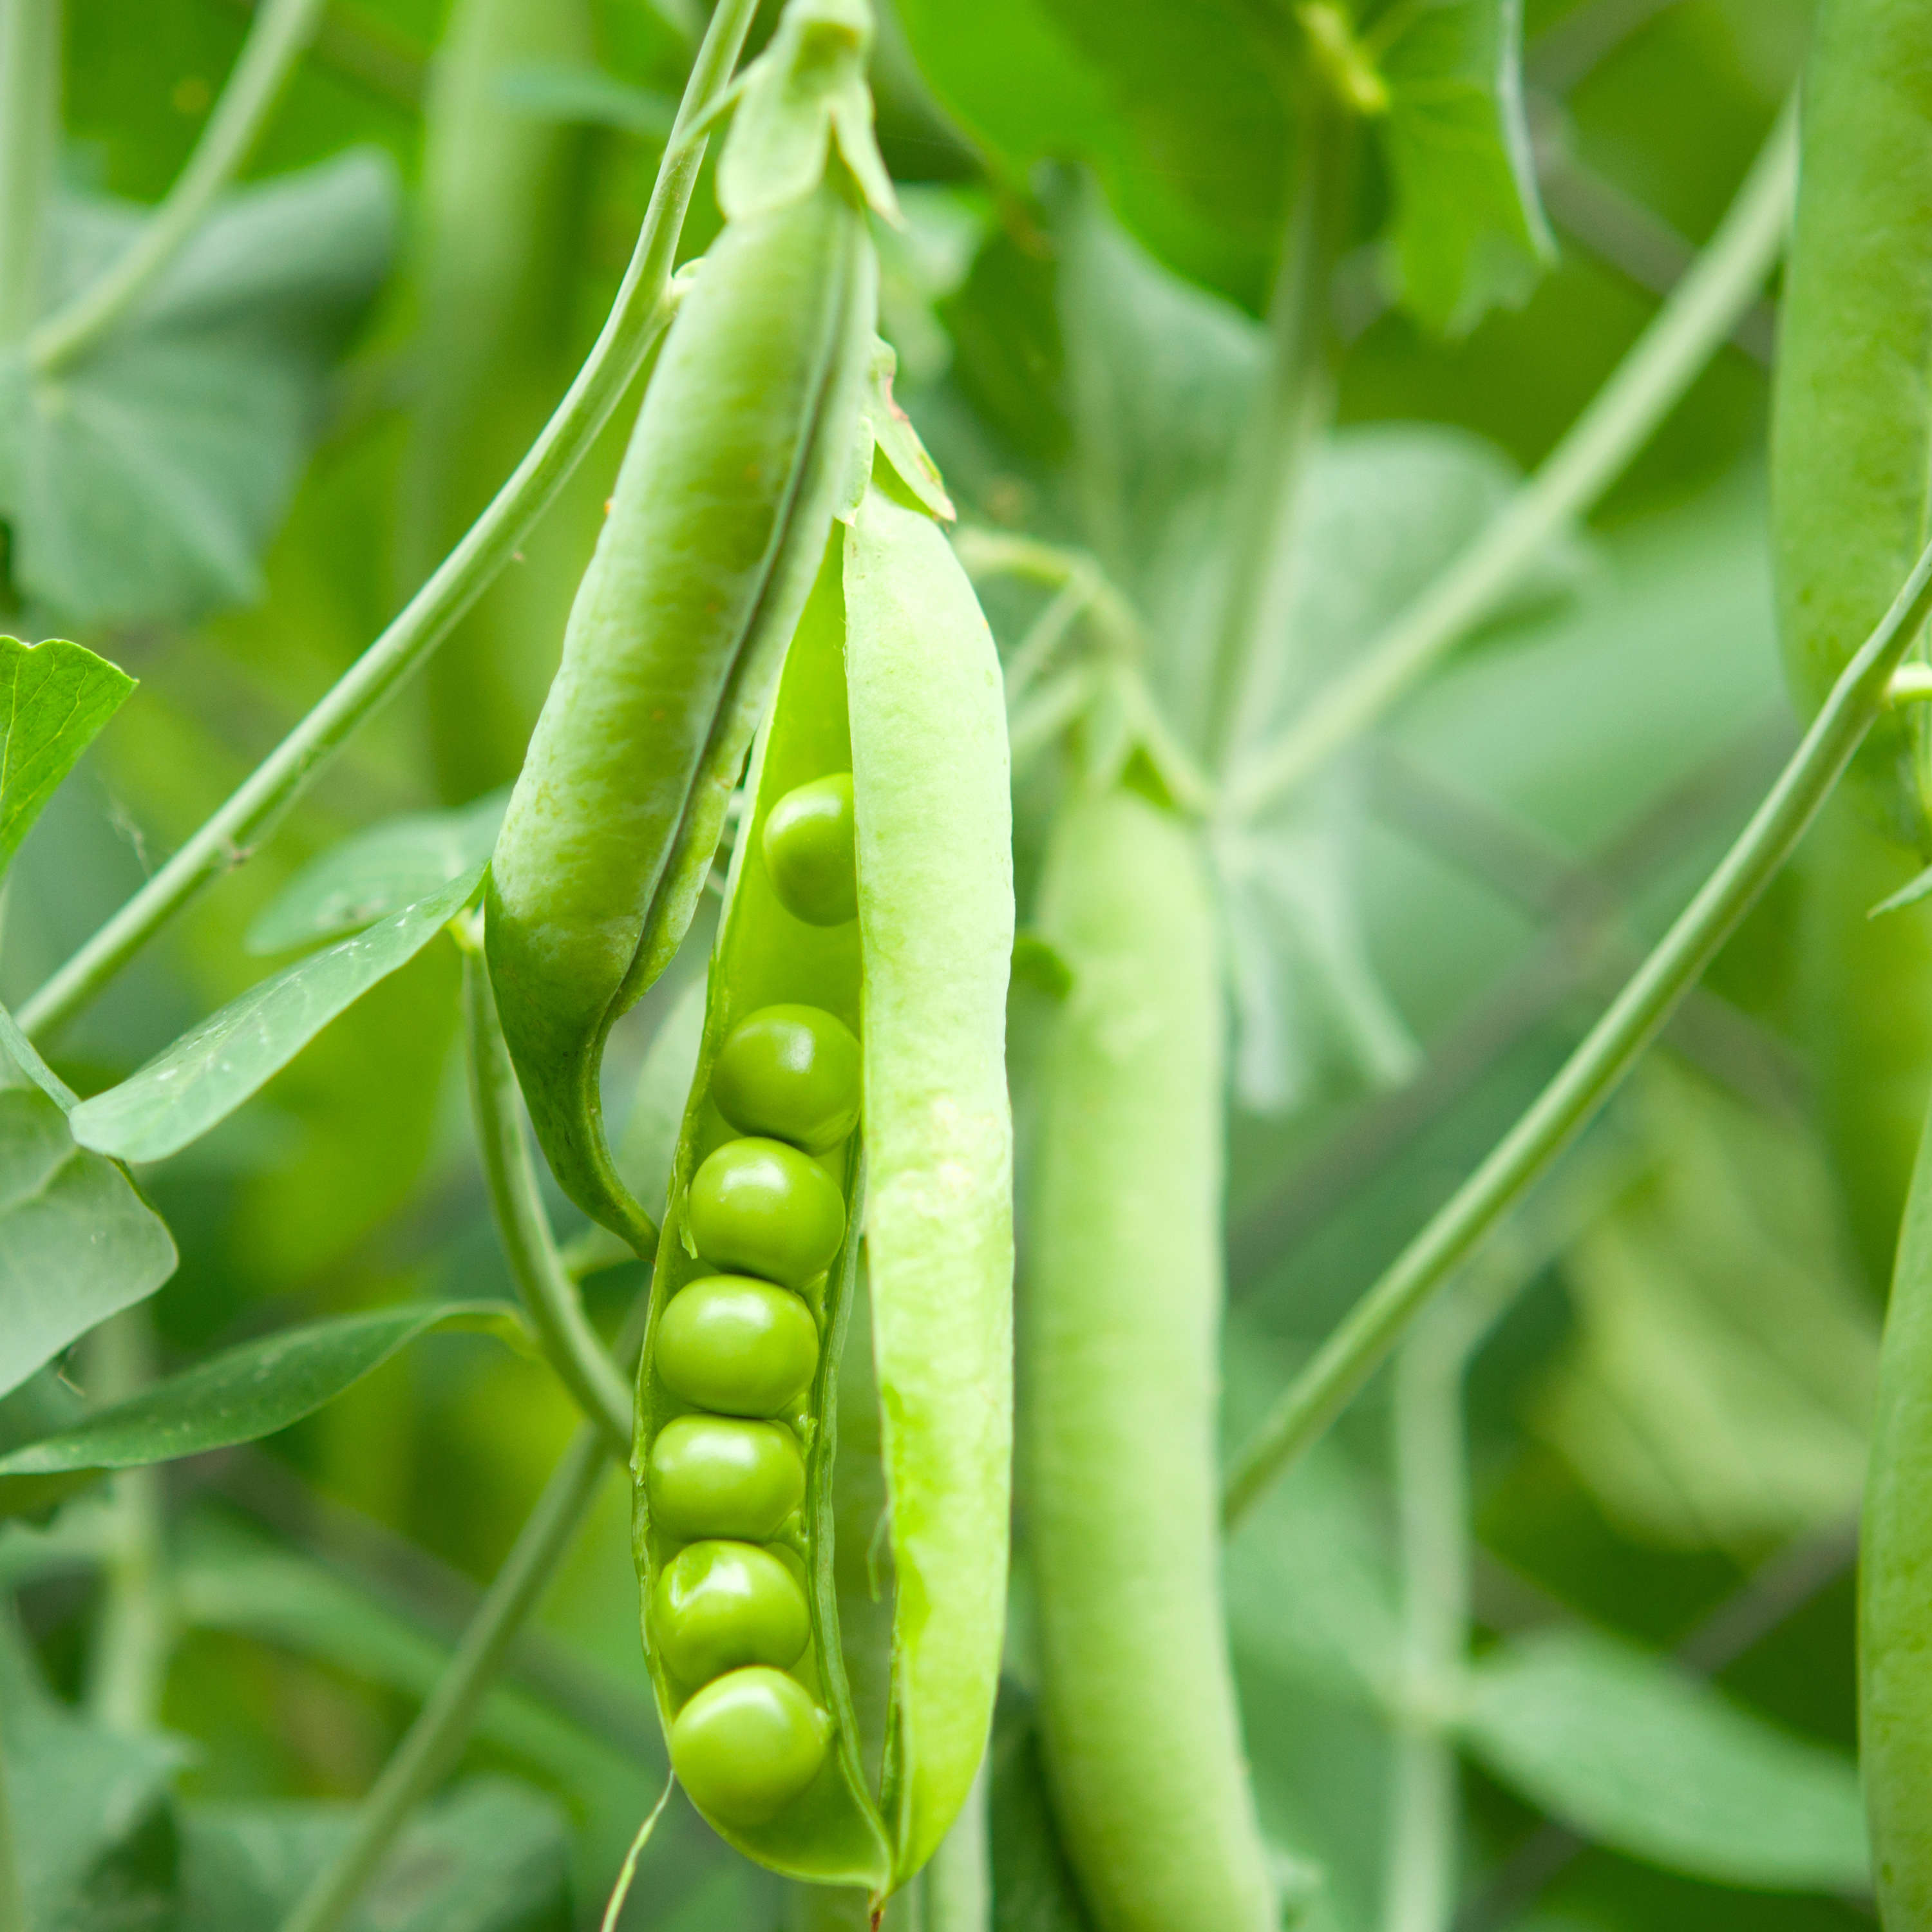 A close image of a pea pod hanging from its plant that has been split open to reveal fresh green peas, while other pods surround it. Photo: ksena32 / iStock.